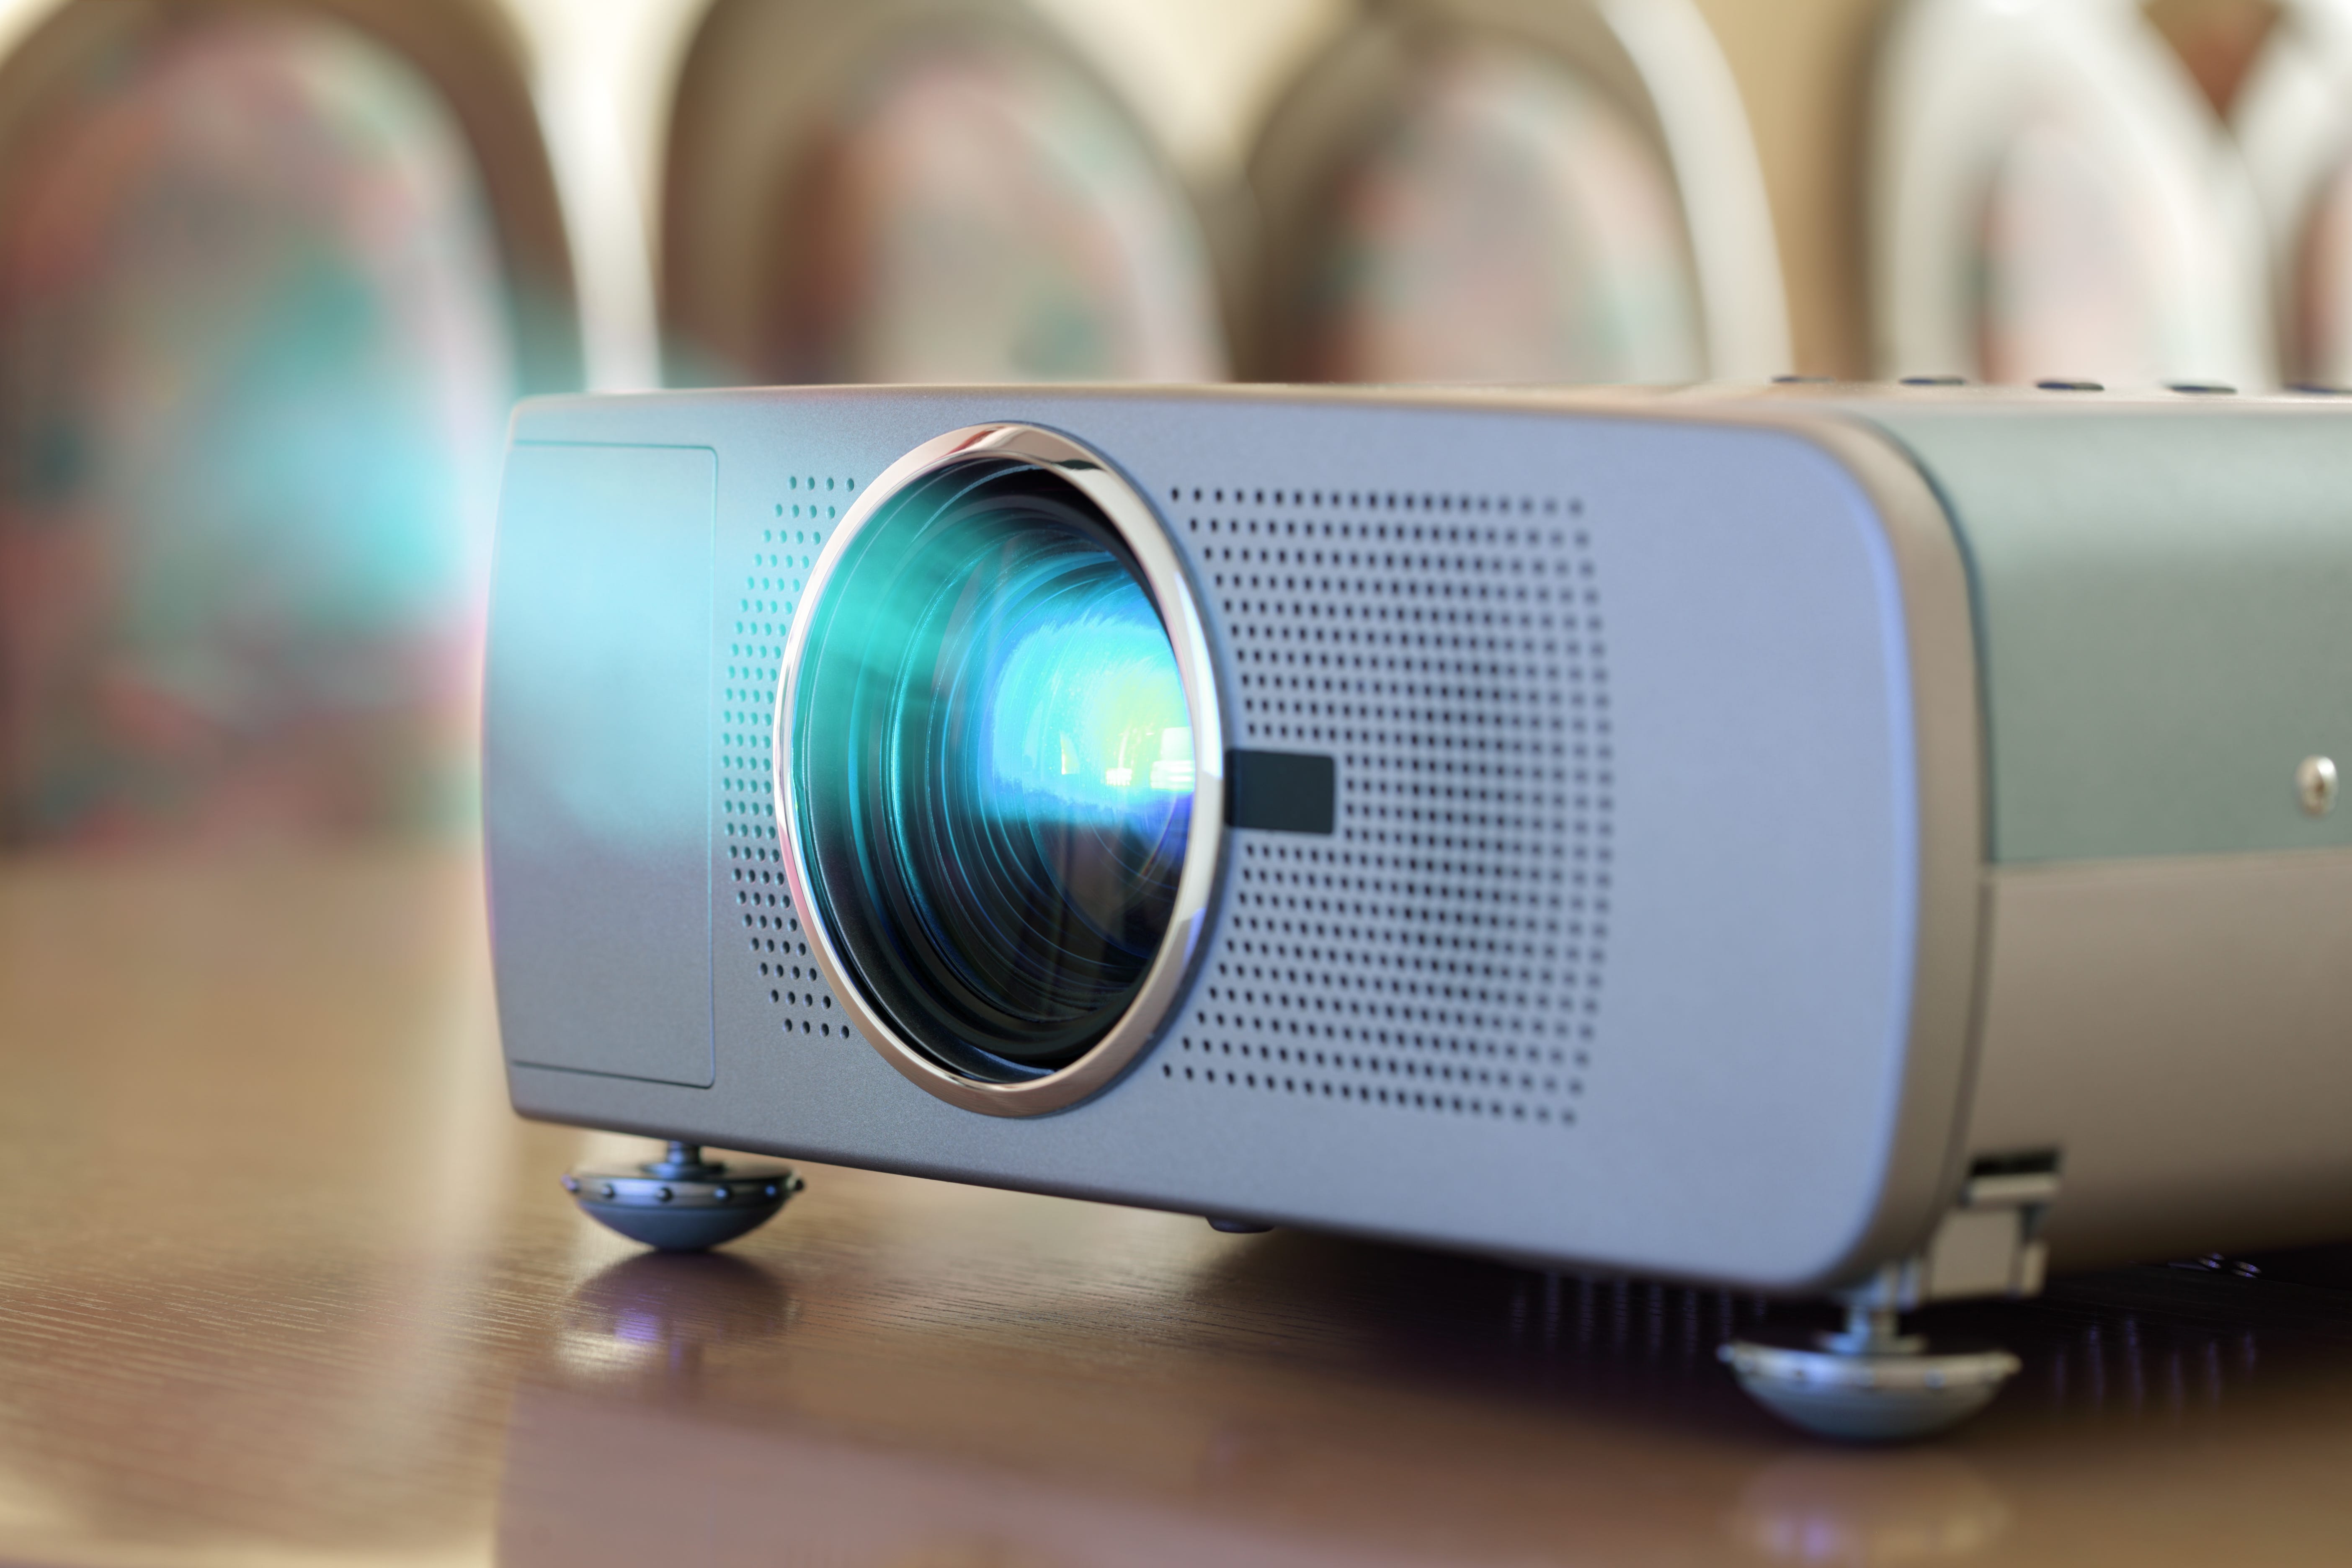 Projectors 101: How Do I Choose the Right One?